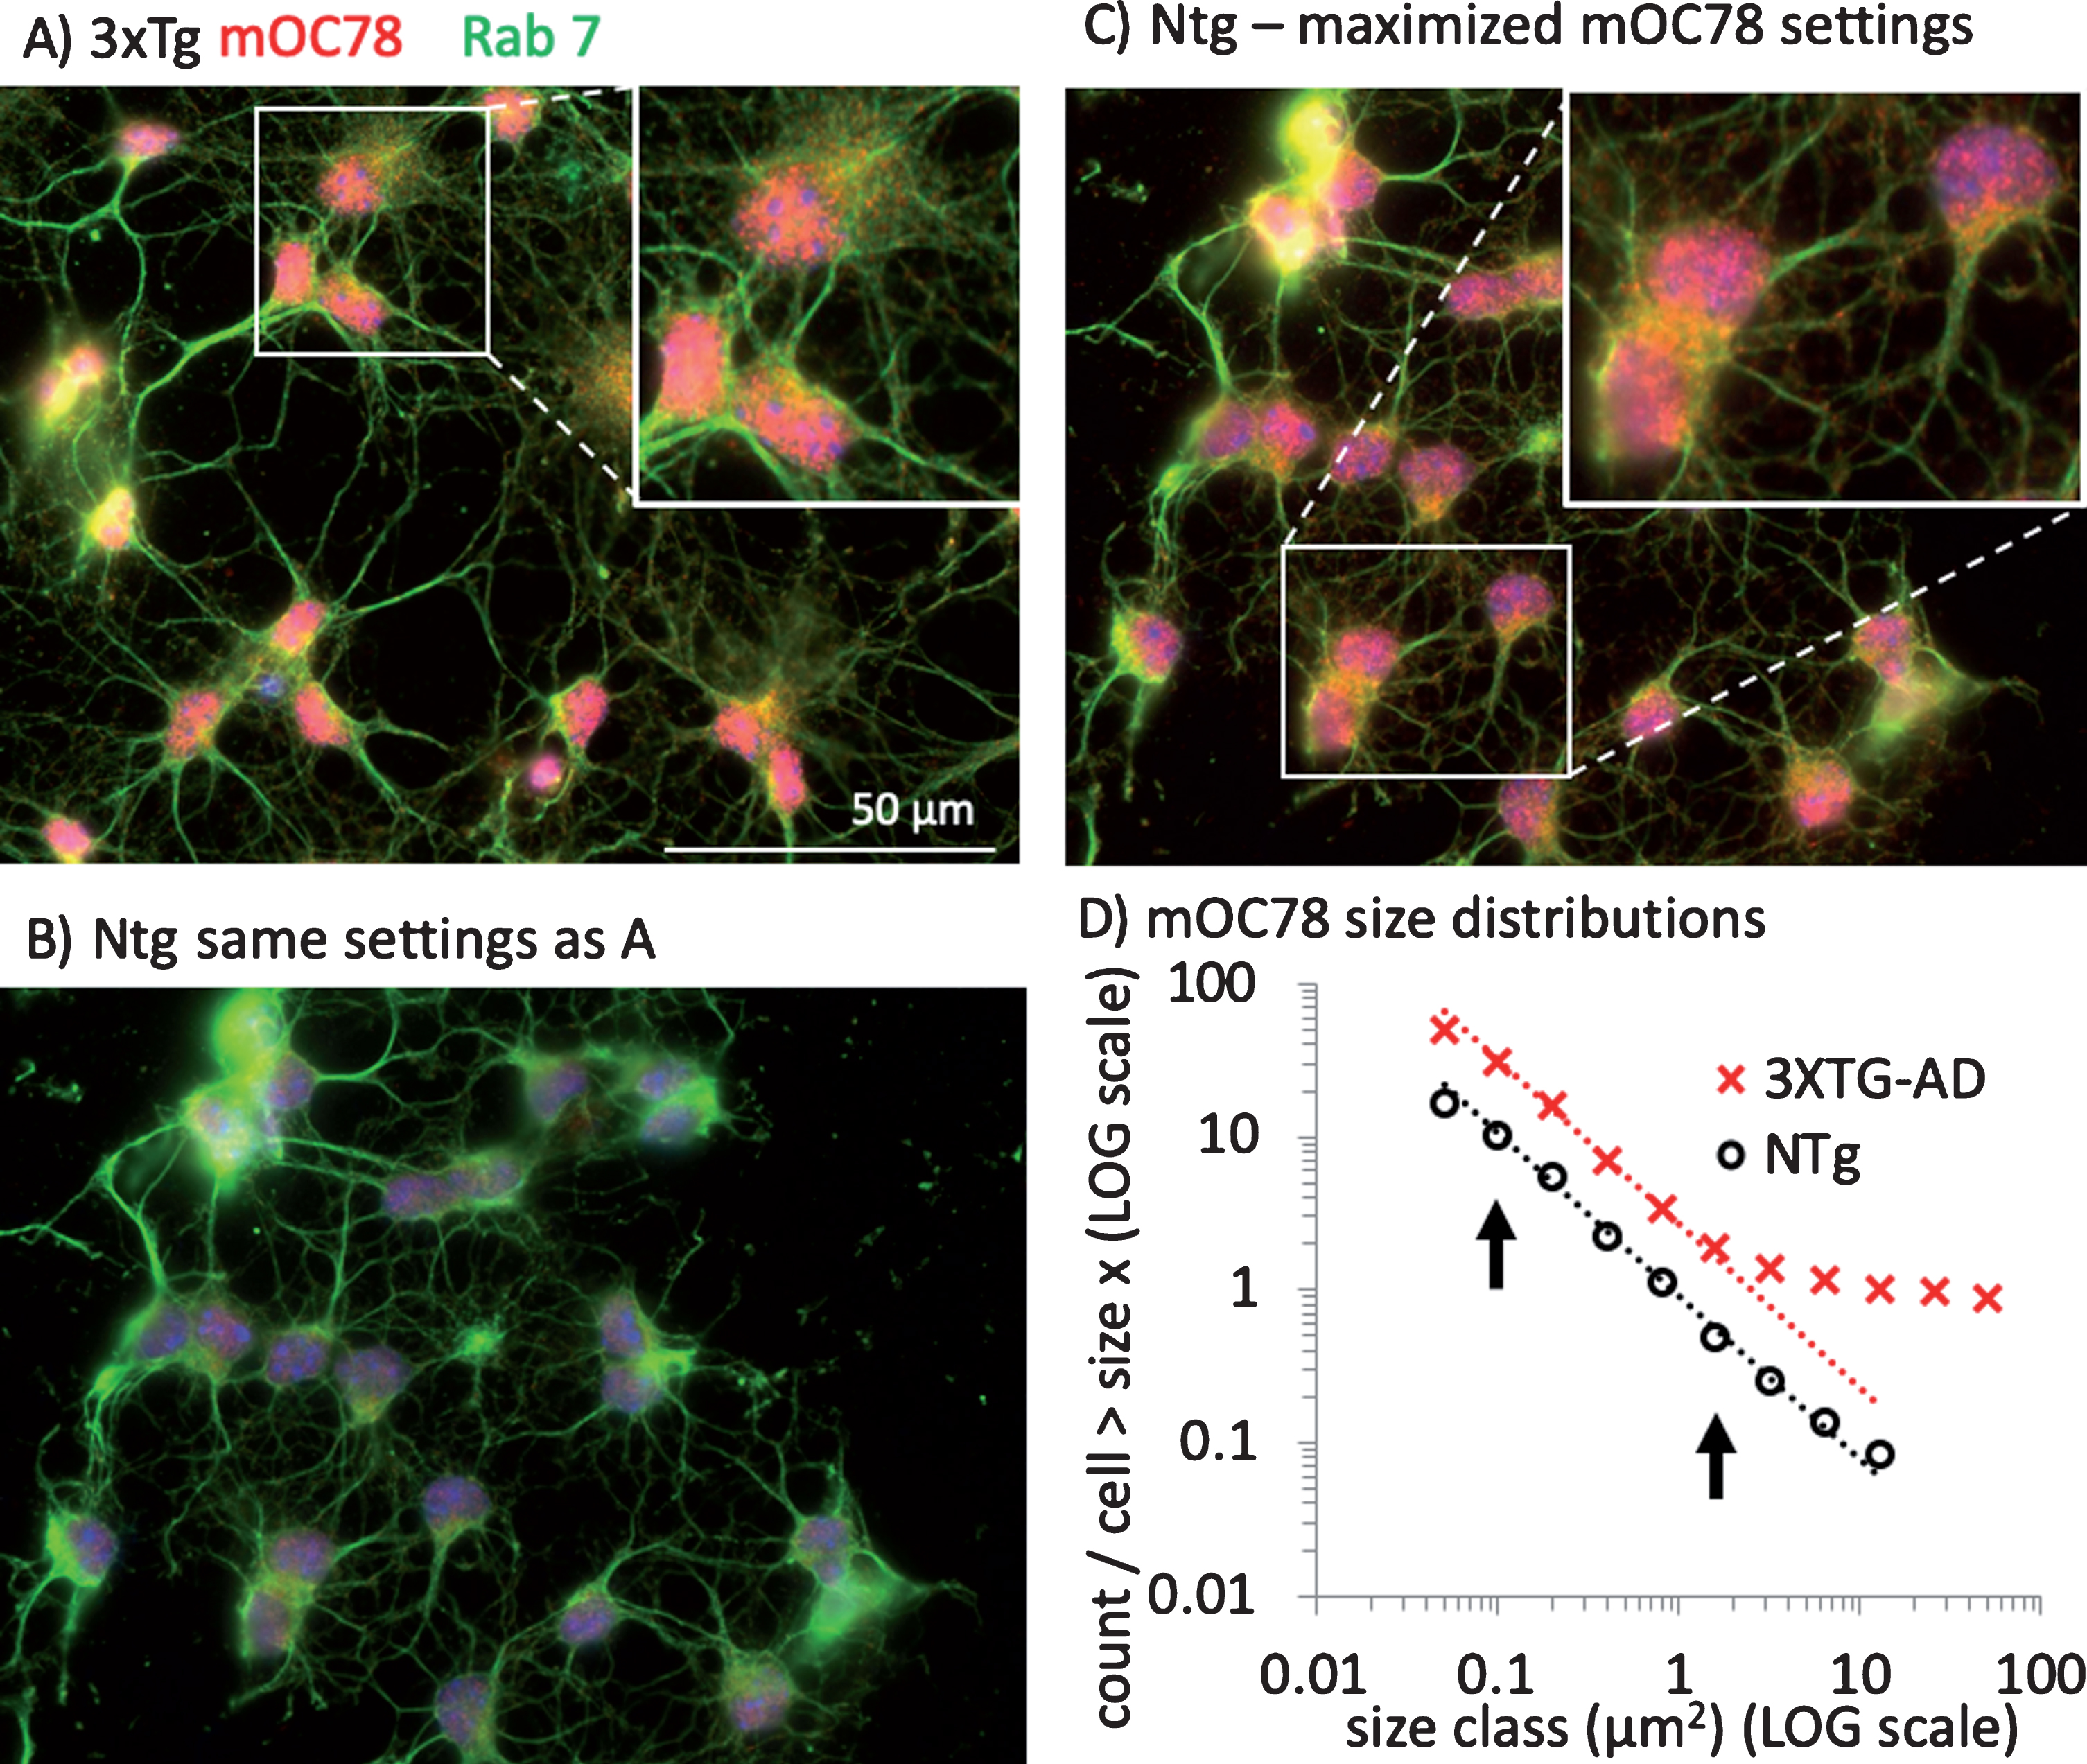 Parallel distributions of intracellular mOC78 amyloid imaged particle sizes in neurons from 3xTg-AD and non-Tg (NTg) mice. A) Neurons from a male 11-month-old 3xTg-AD mouse stained with mOC78 (red), Rab7 (green), and bisbenzimide (blue). Enlarged field is 55μm wide. B) Neurons from a male 11-month-old non-Tg mouse cultured and stained at the same time and imaged at the same settings as in A. C) Same field as B, but with gain increased to better visualize mOC78 particle sizes. Enlarged field is 46μm wide. D) Distribution of mOC78 particle sizes on log-log scale. Data was log-binned and least squares fit over the range indicated by arrows. 3xTg-AD from 79 cells, 3899 particles, fit to count/cell = 0.430*10∧(–1.073*size), R2 = 0.999; non-Tg from 96 cells, 1593 particles fit to count/cell = –0.050 * 10∧(–1.067*size), R2 = 0.998. File 180511